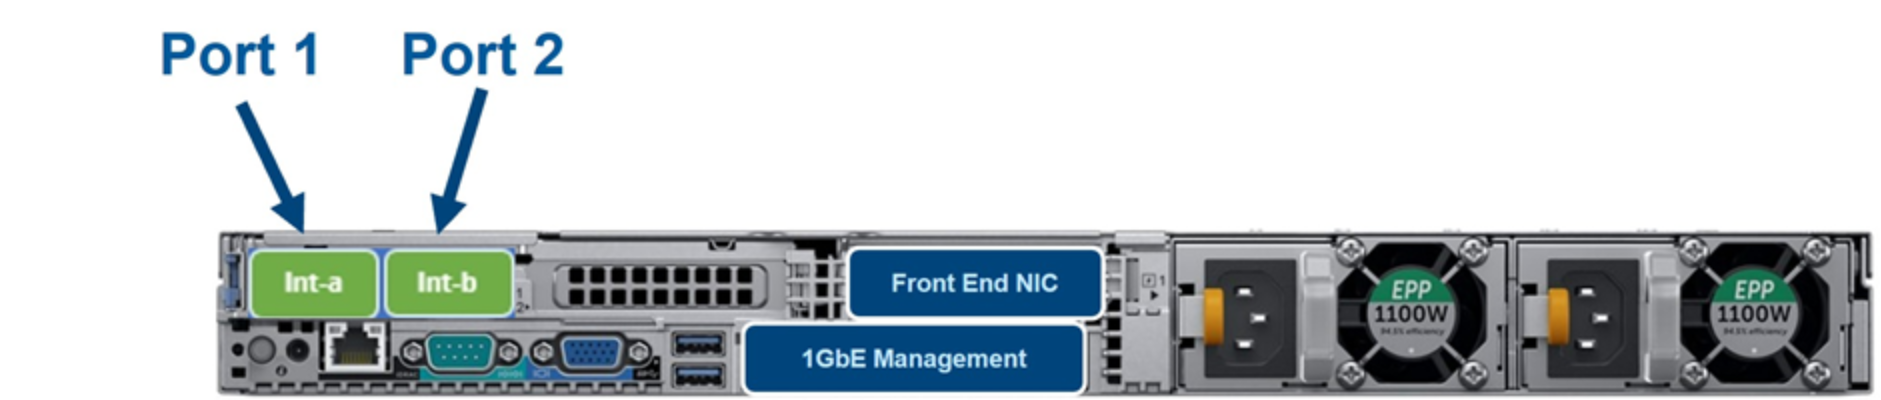 A diagram depicting the rear view highlighting the internal back-end and front-end NIC ports for the F600 node.